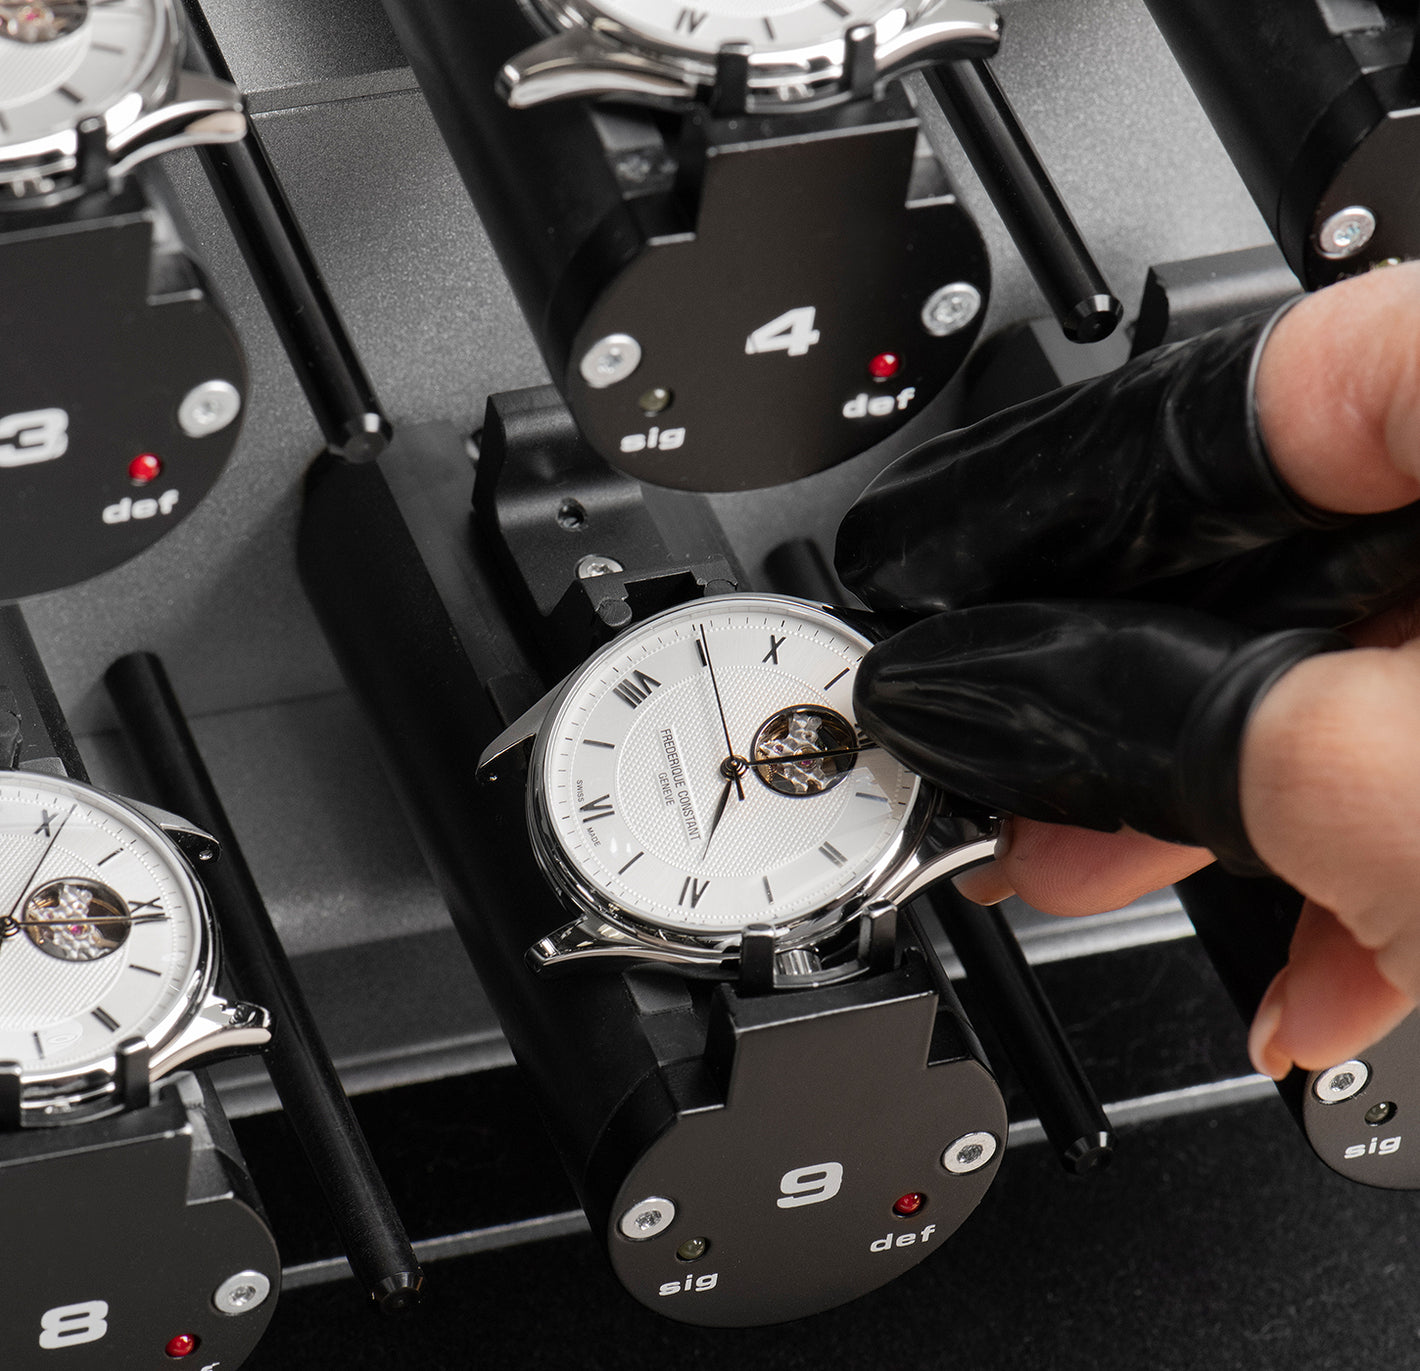 Frederique Constant watch being made